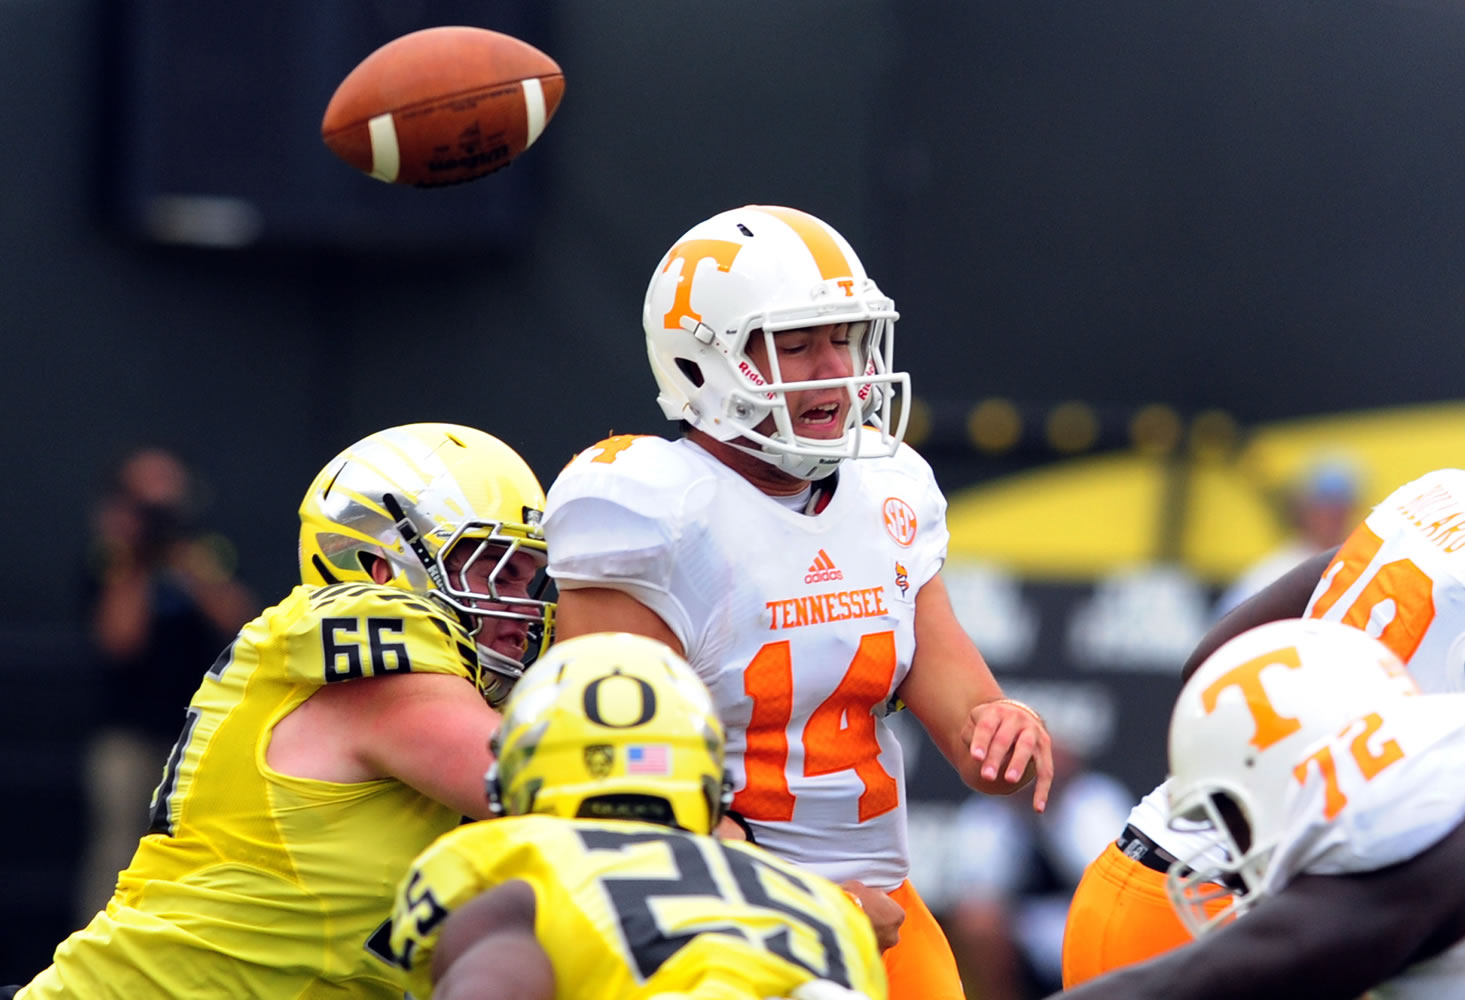 Tennessee quarterback Justin Worley (14) loses the ball as he is hit by Oregon defensive tackle Taylor Hart (66) during the second quarter Saturday in Eugene, Ore.